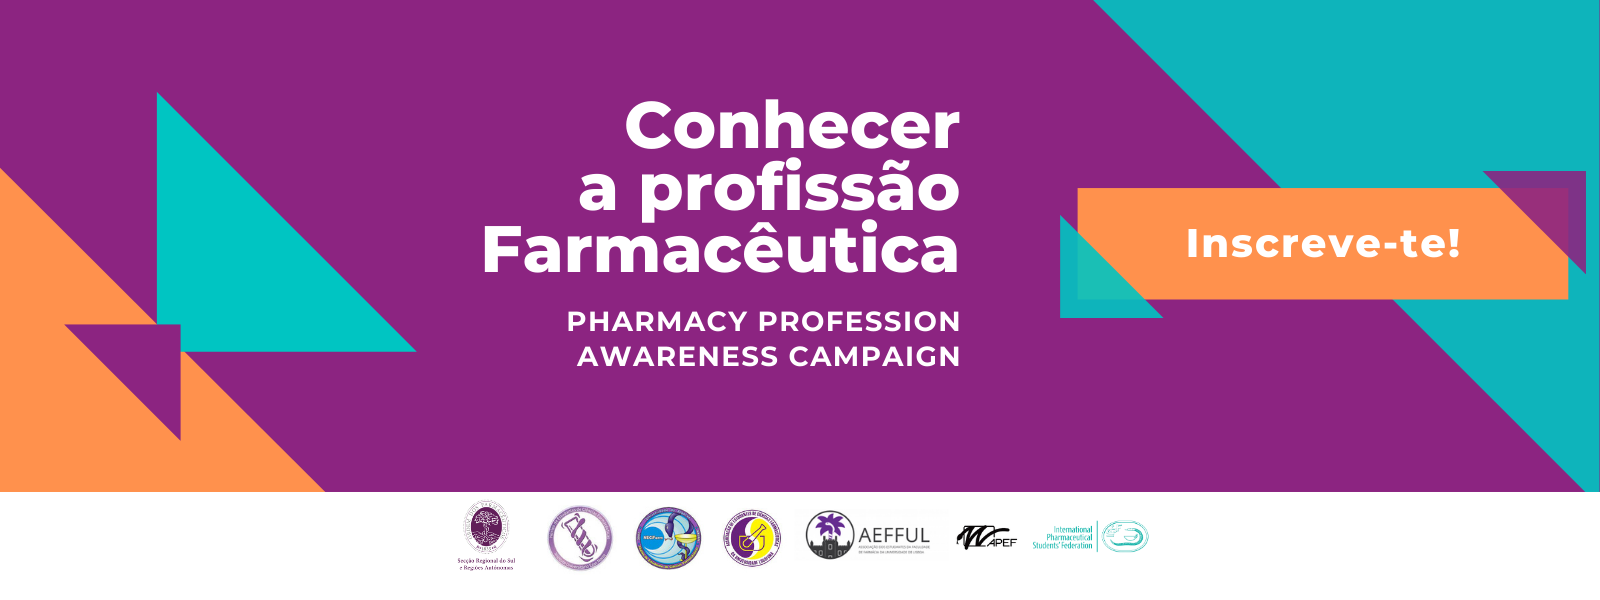 Pharmacy Profession Awareness Campaign